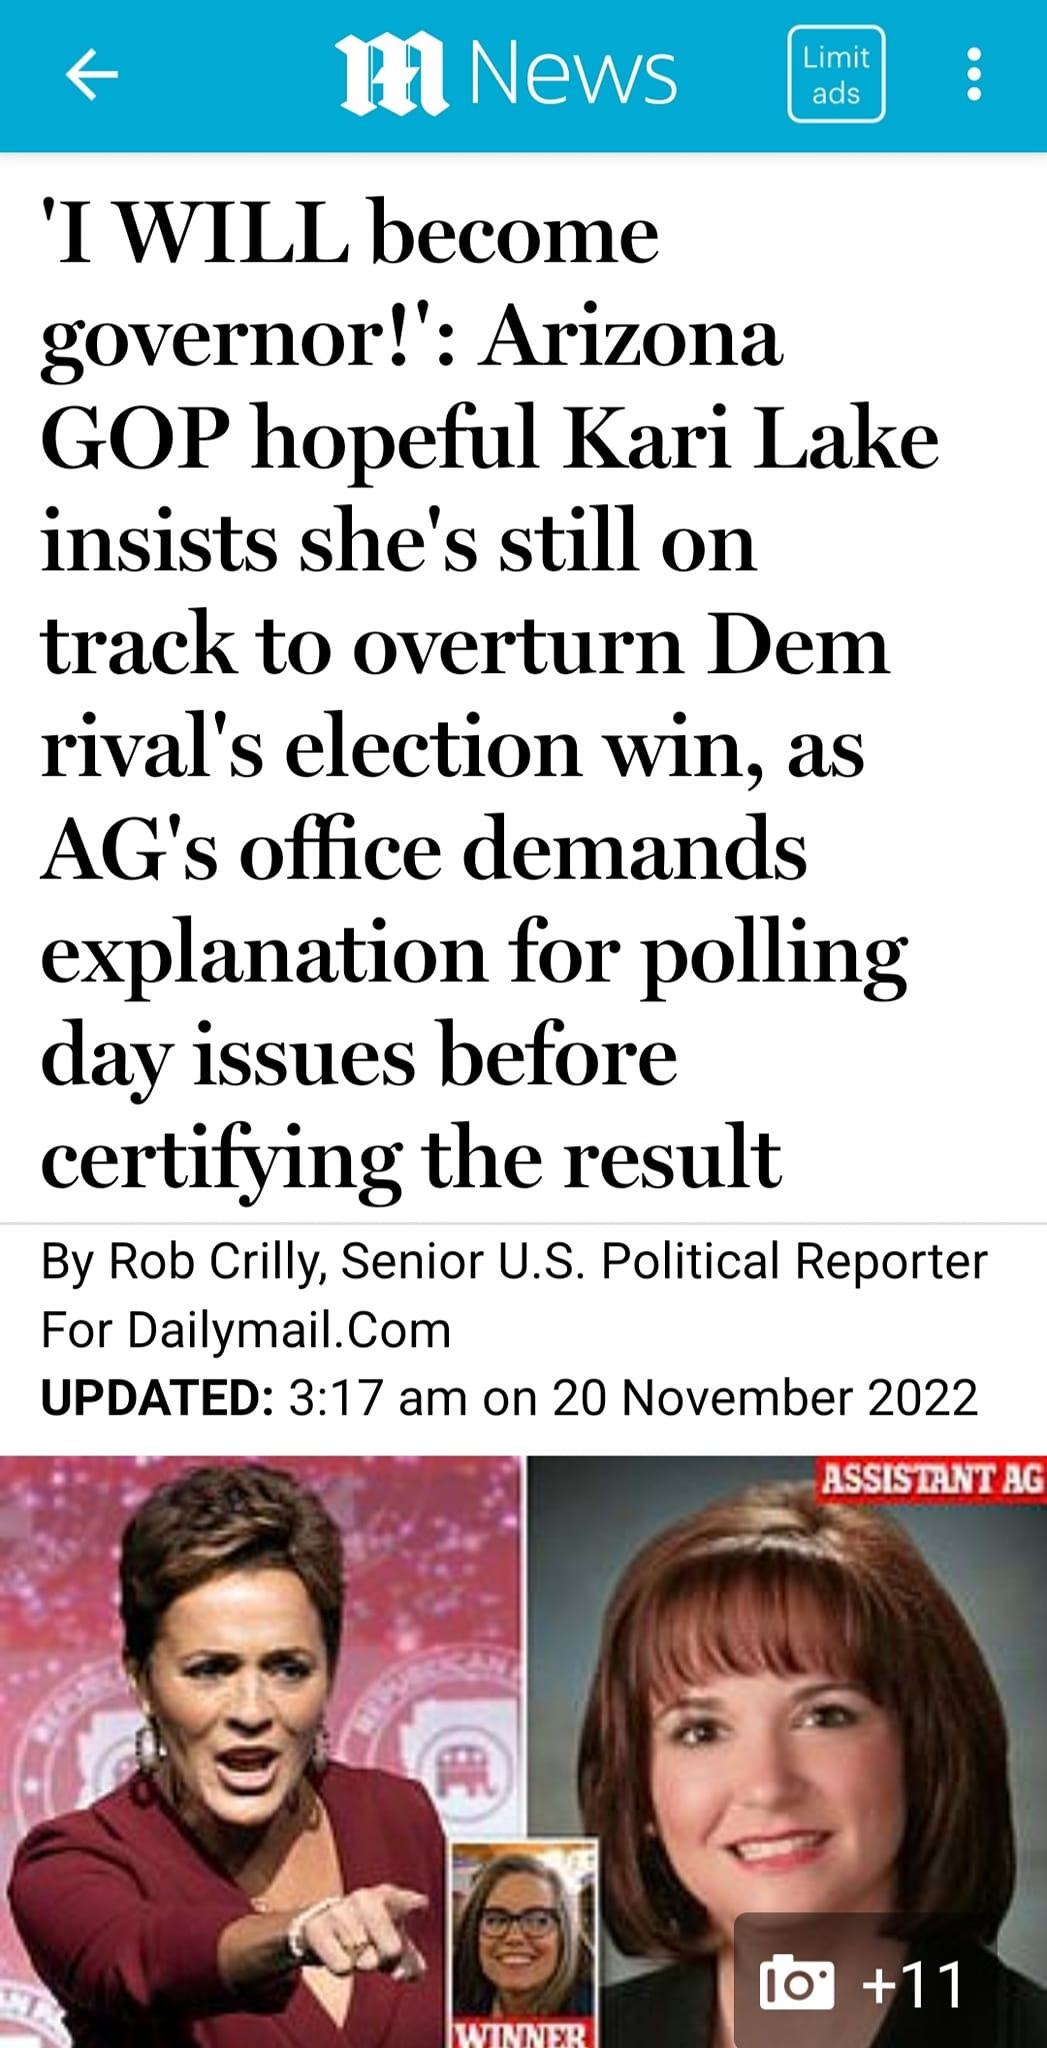 May be an image of 3 people and text that says 'm News Limit ads I WILL become governor!': Arizona GOP hopeful Kari Lake insists she's still on track to overturn Dem rival's election win, as AG's office demands explanation for polling day issues before certifying the result By Rob Crilly, Senior U.S. Political Reporter For Dailymail. UPDATED: 3:17 am on 20 November 2022 ASSISTANTAG +11'